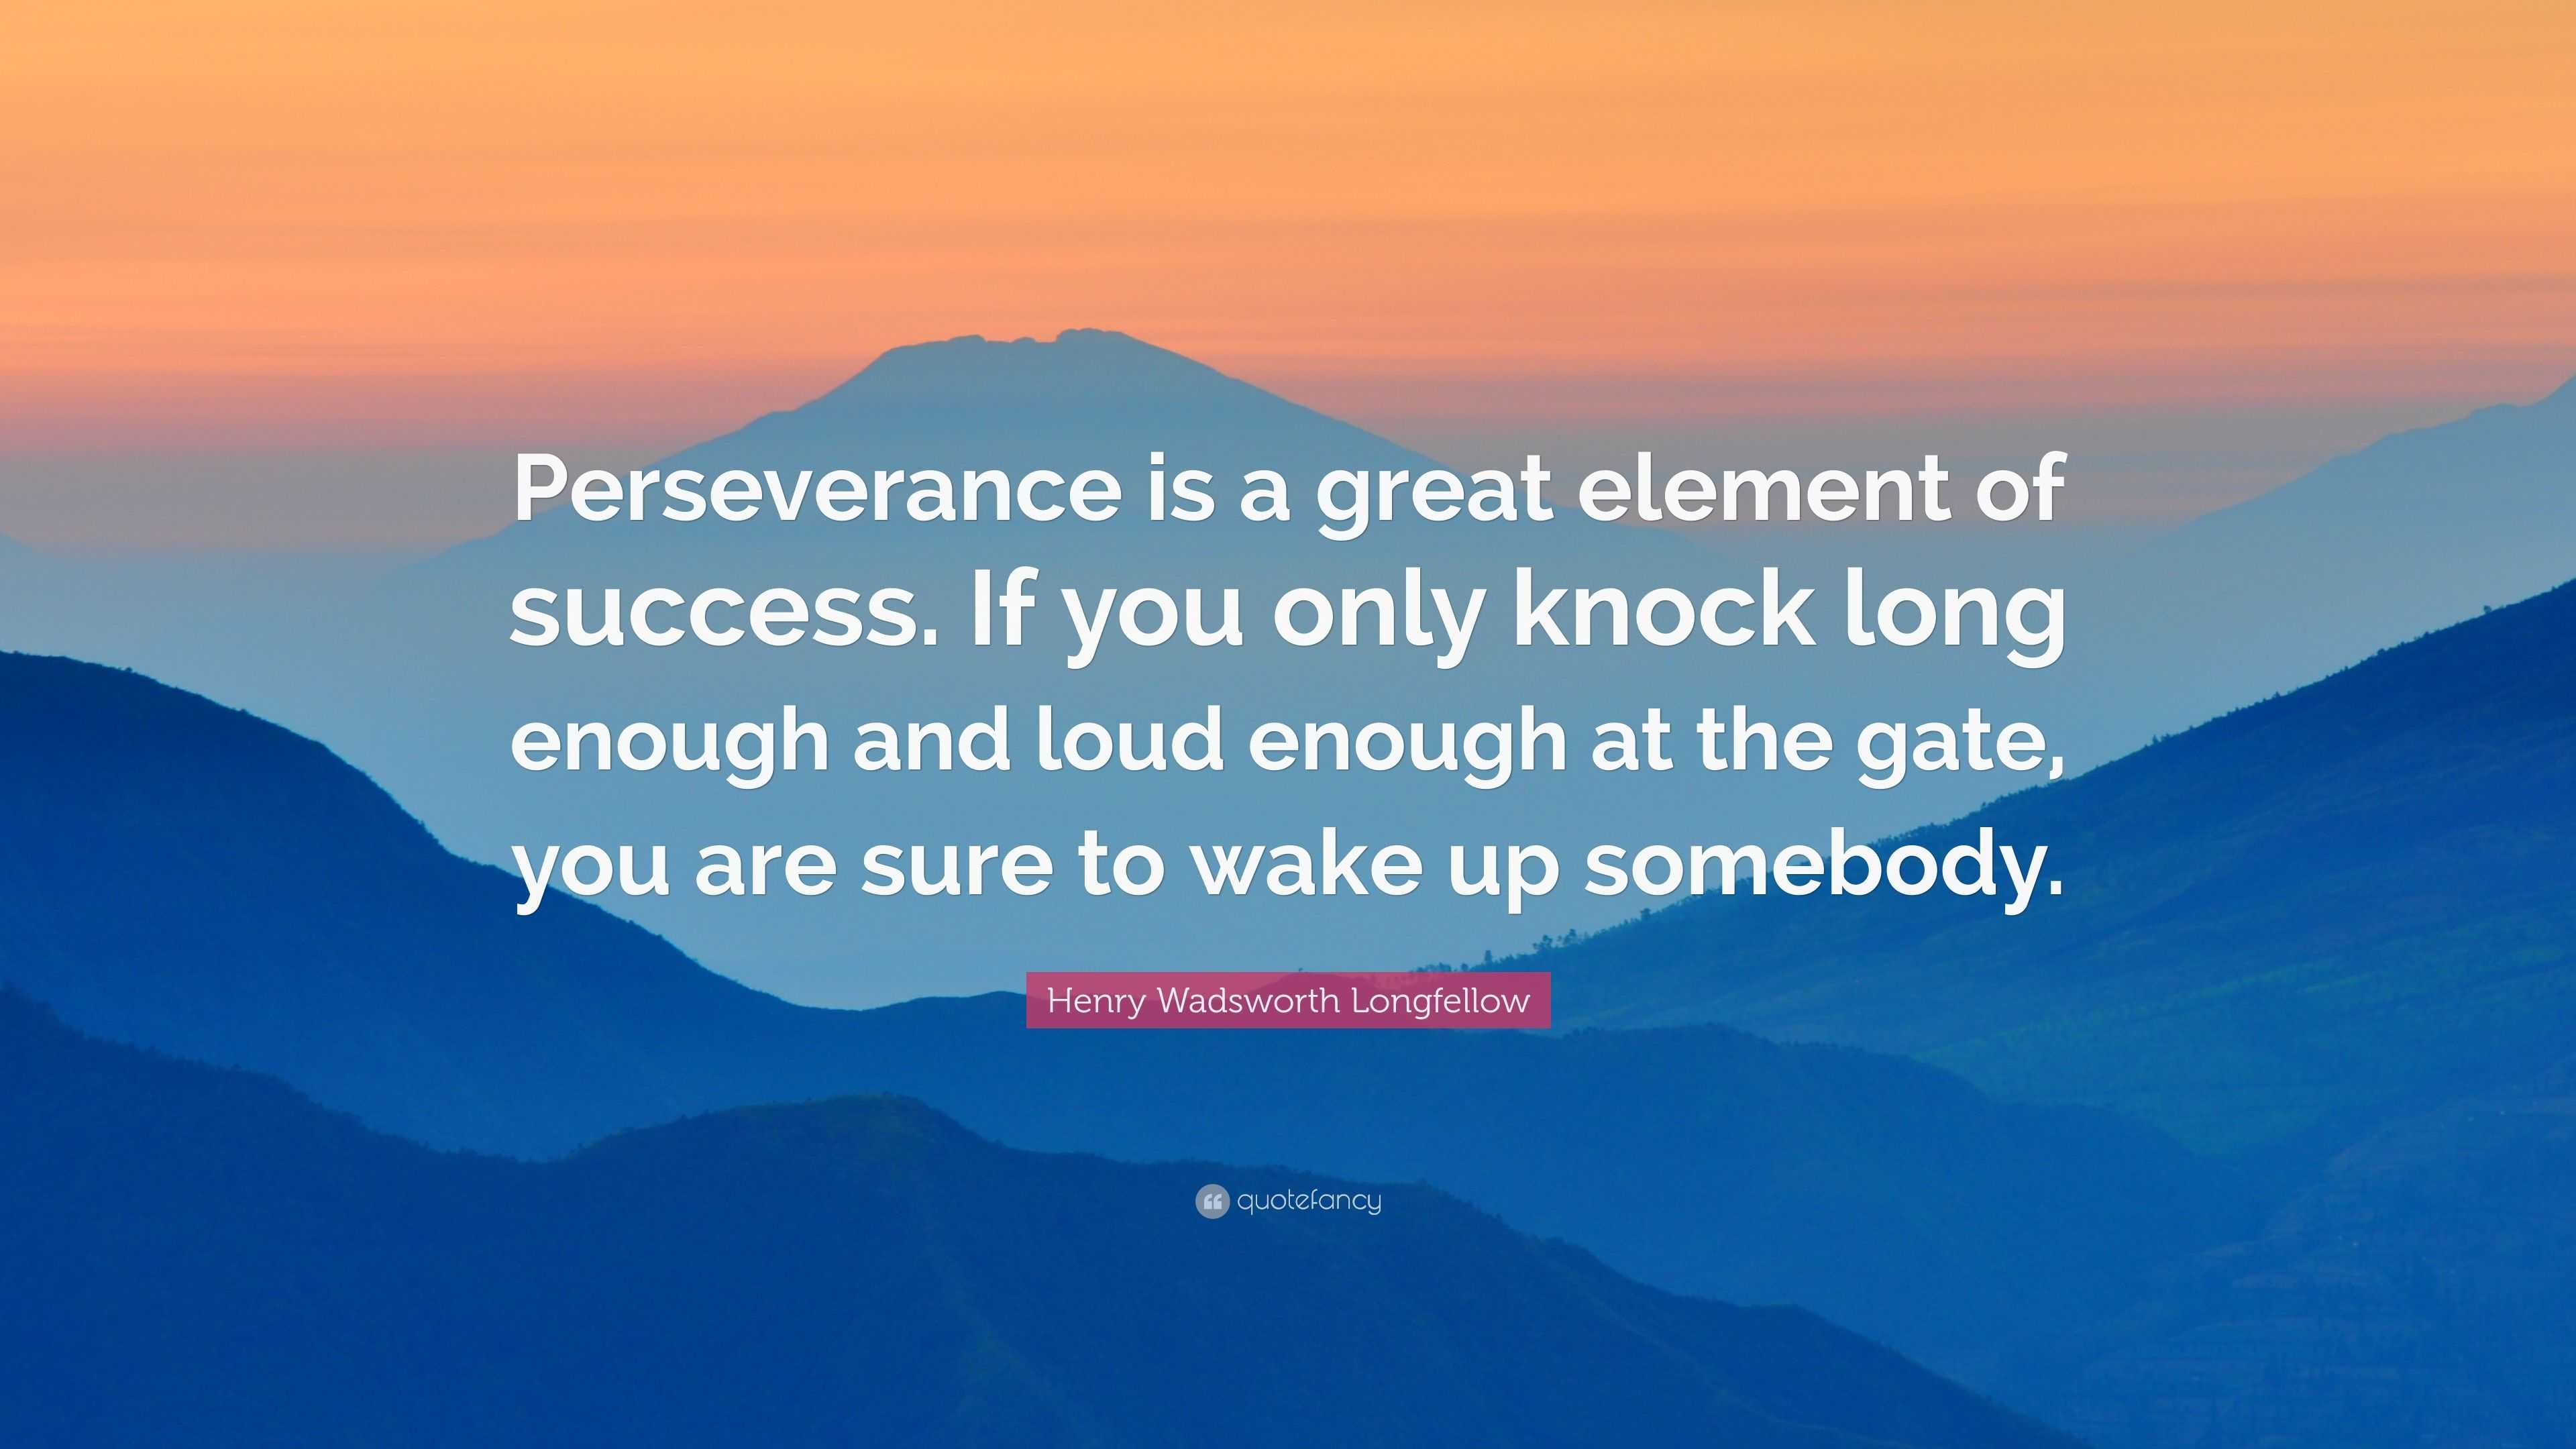 Henry Wadsworth Longfellow Quote: “Perseverance is a great element of ...